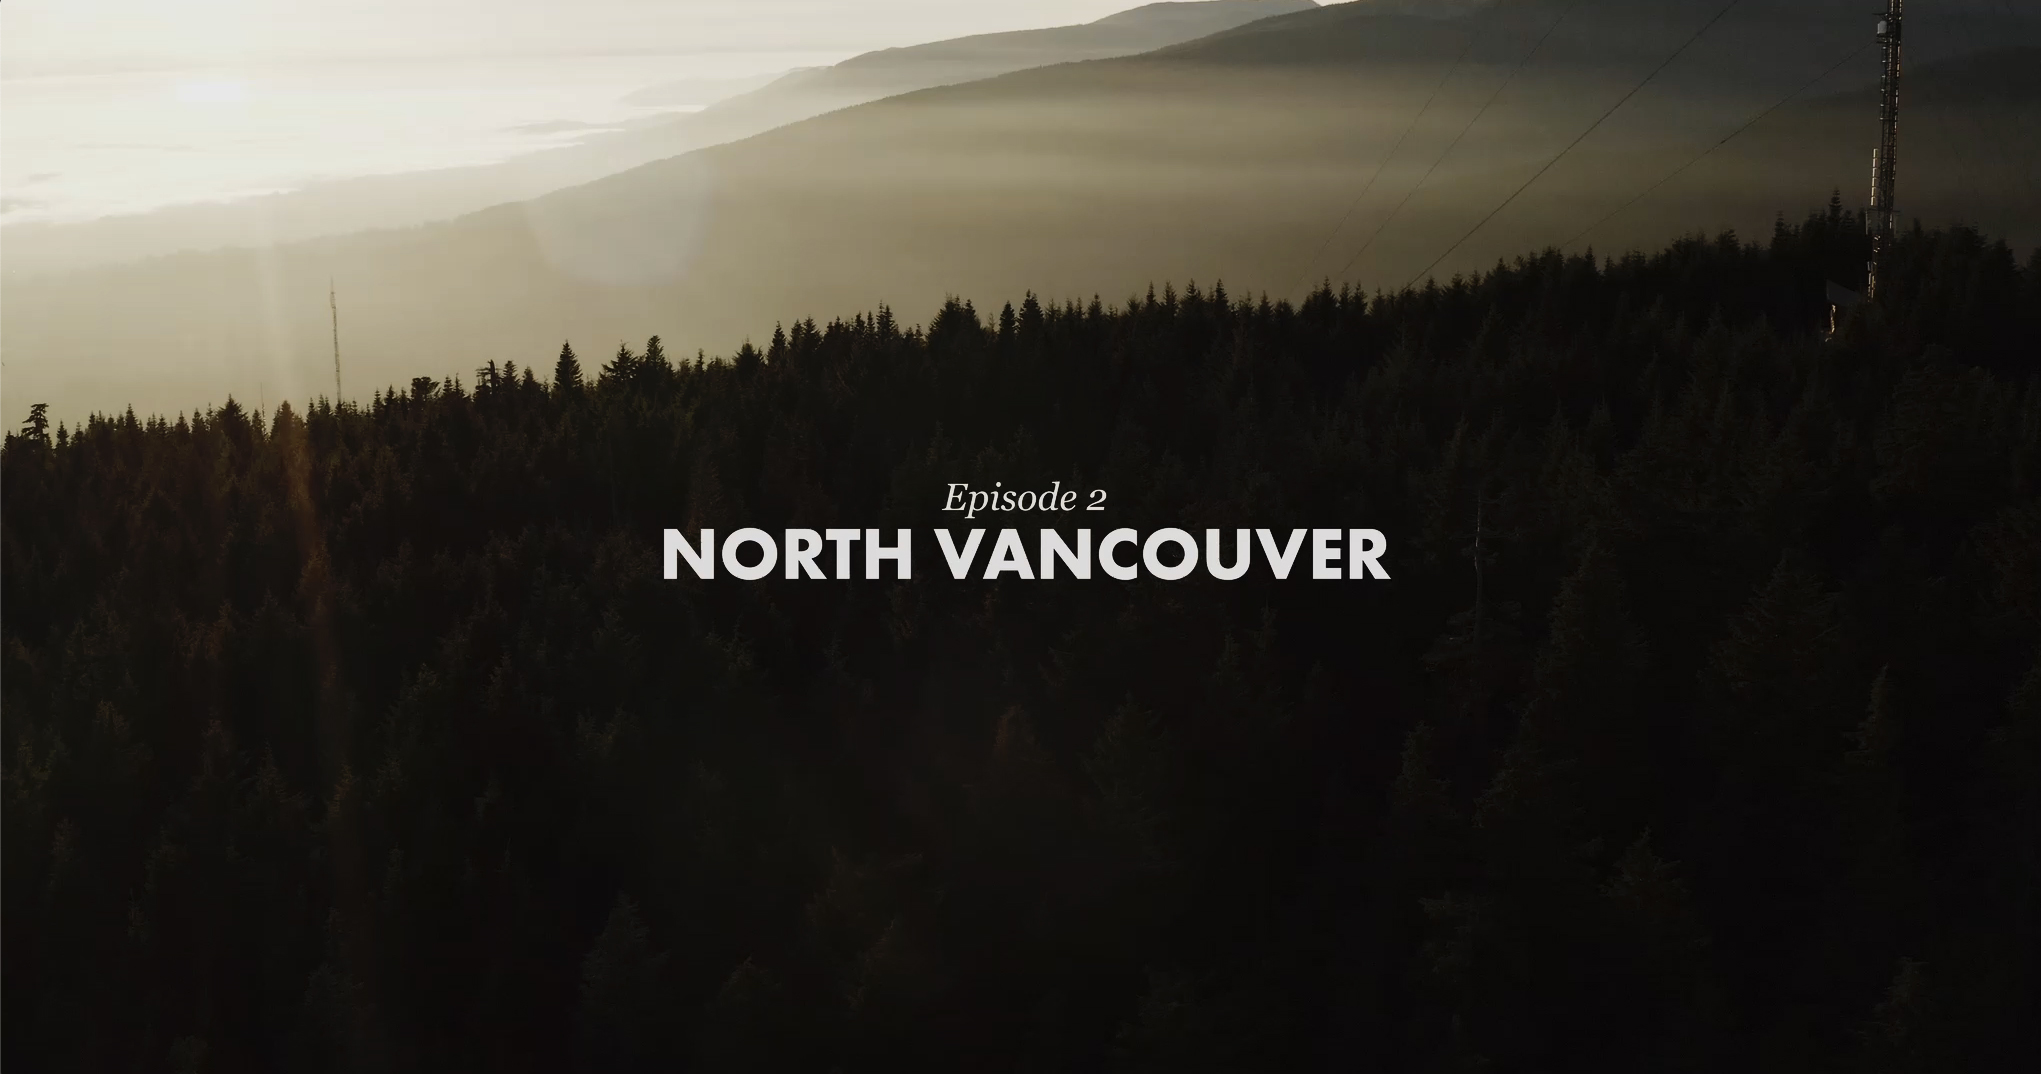 VIDEO: The SHOWCASE – Episode 2, North Vancouver